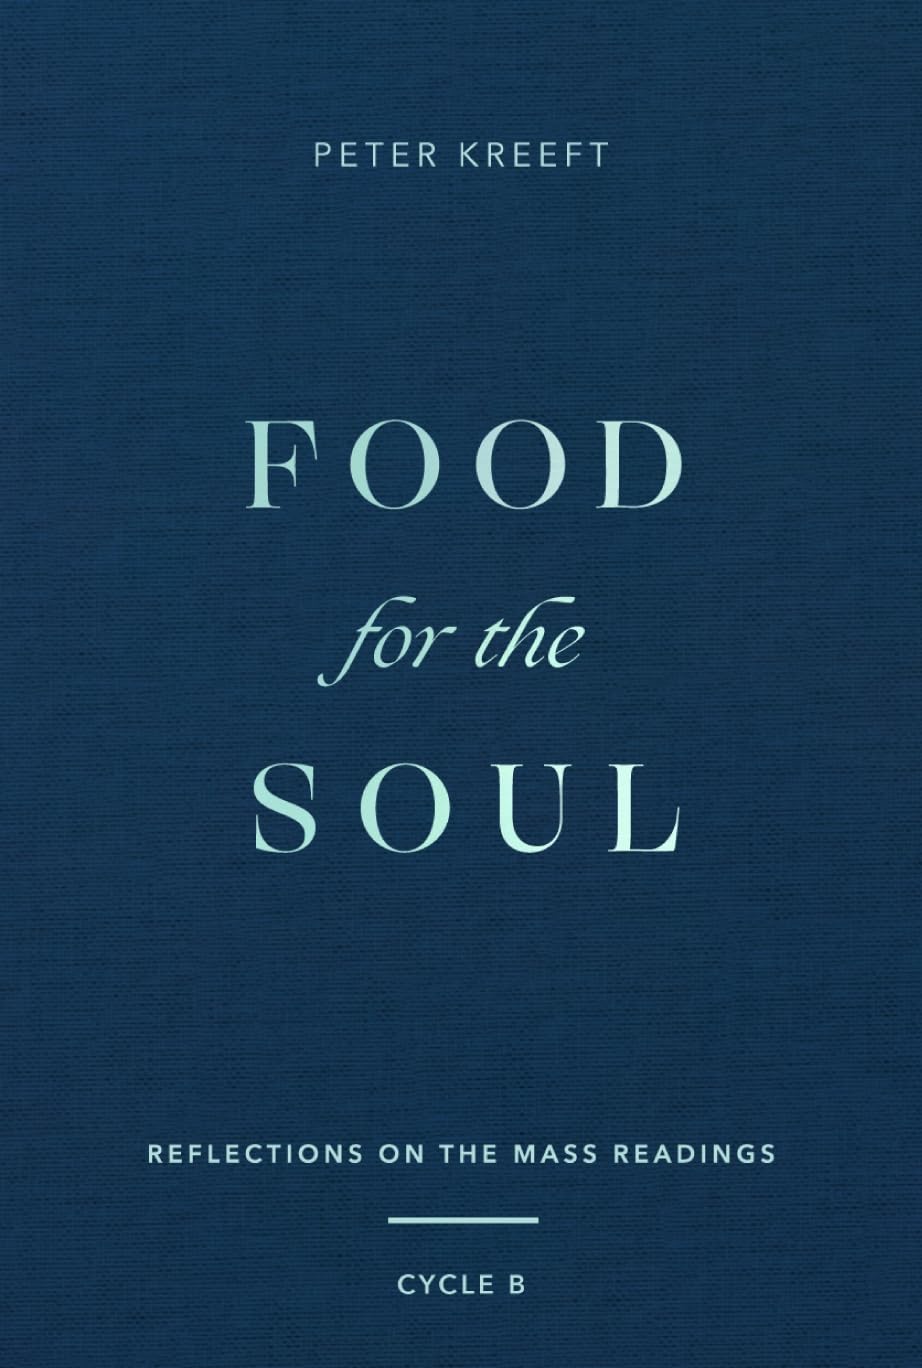 Food for the Soul book cover